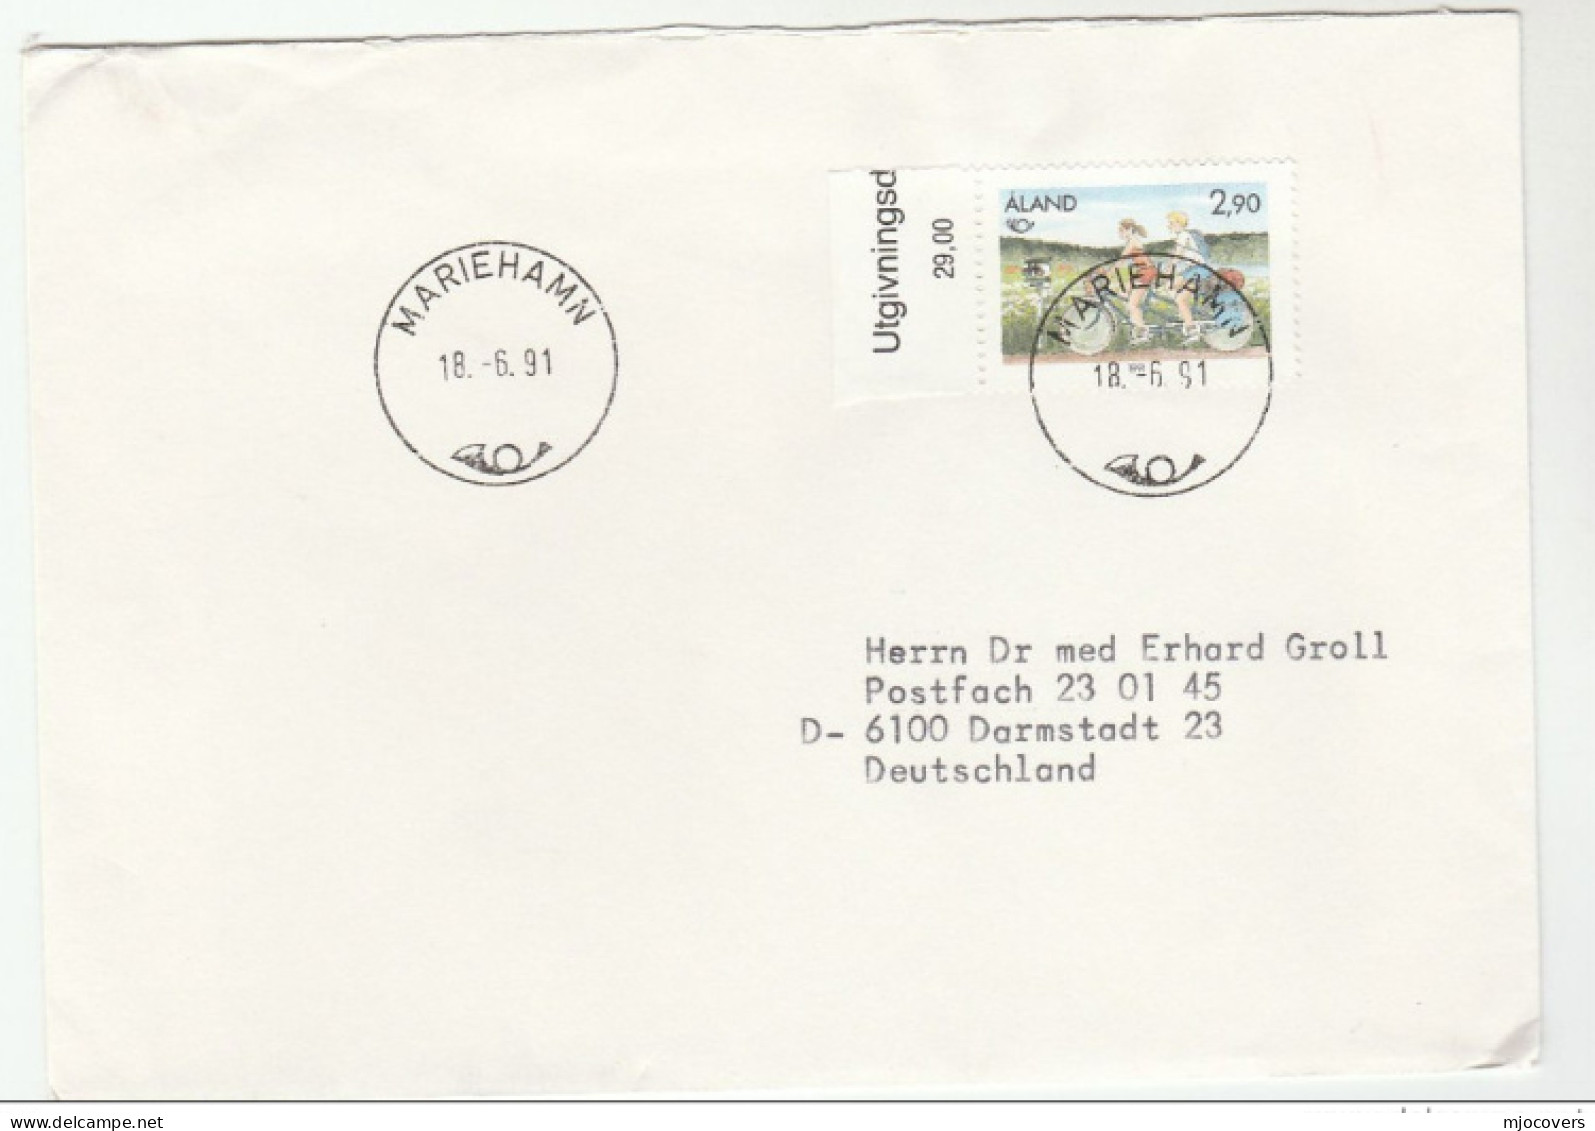 CYCLING Mariehamn ALAND Cover To Germany Bike Bicycle 1991 Stamps - Cycling